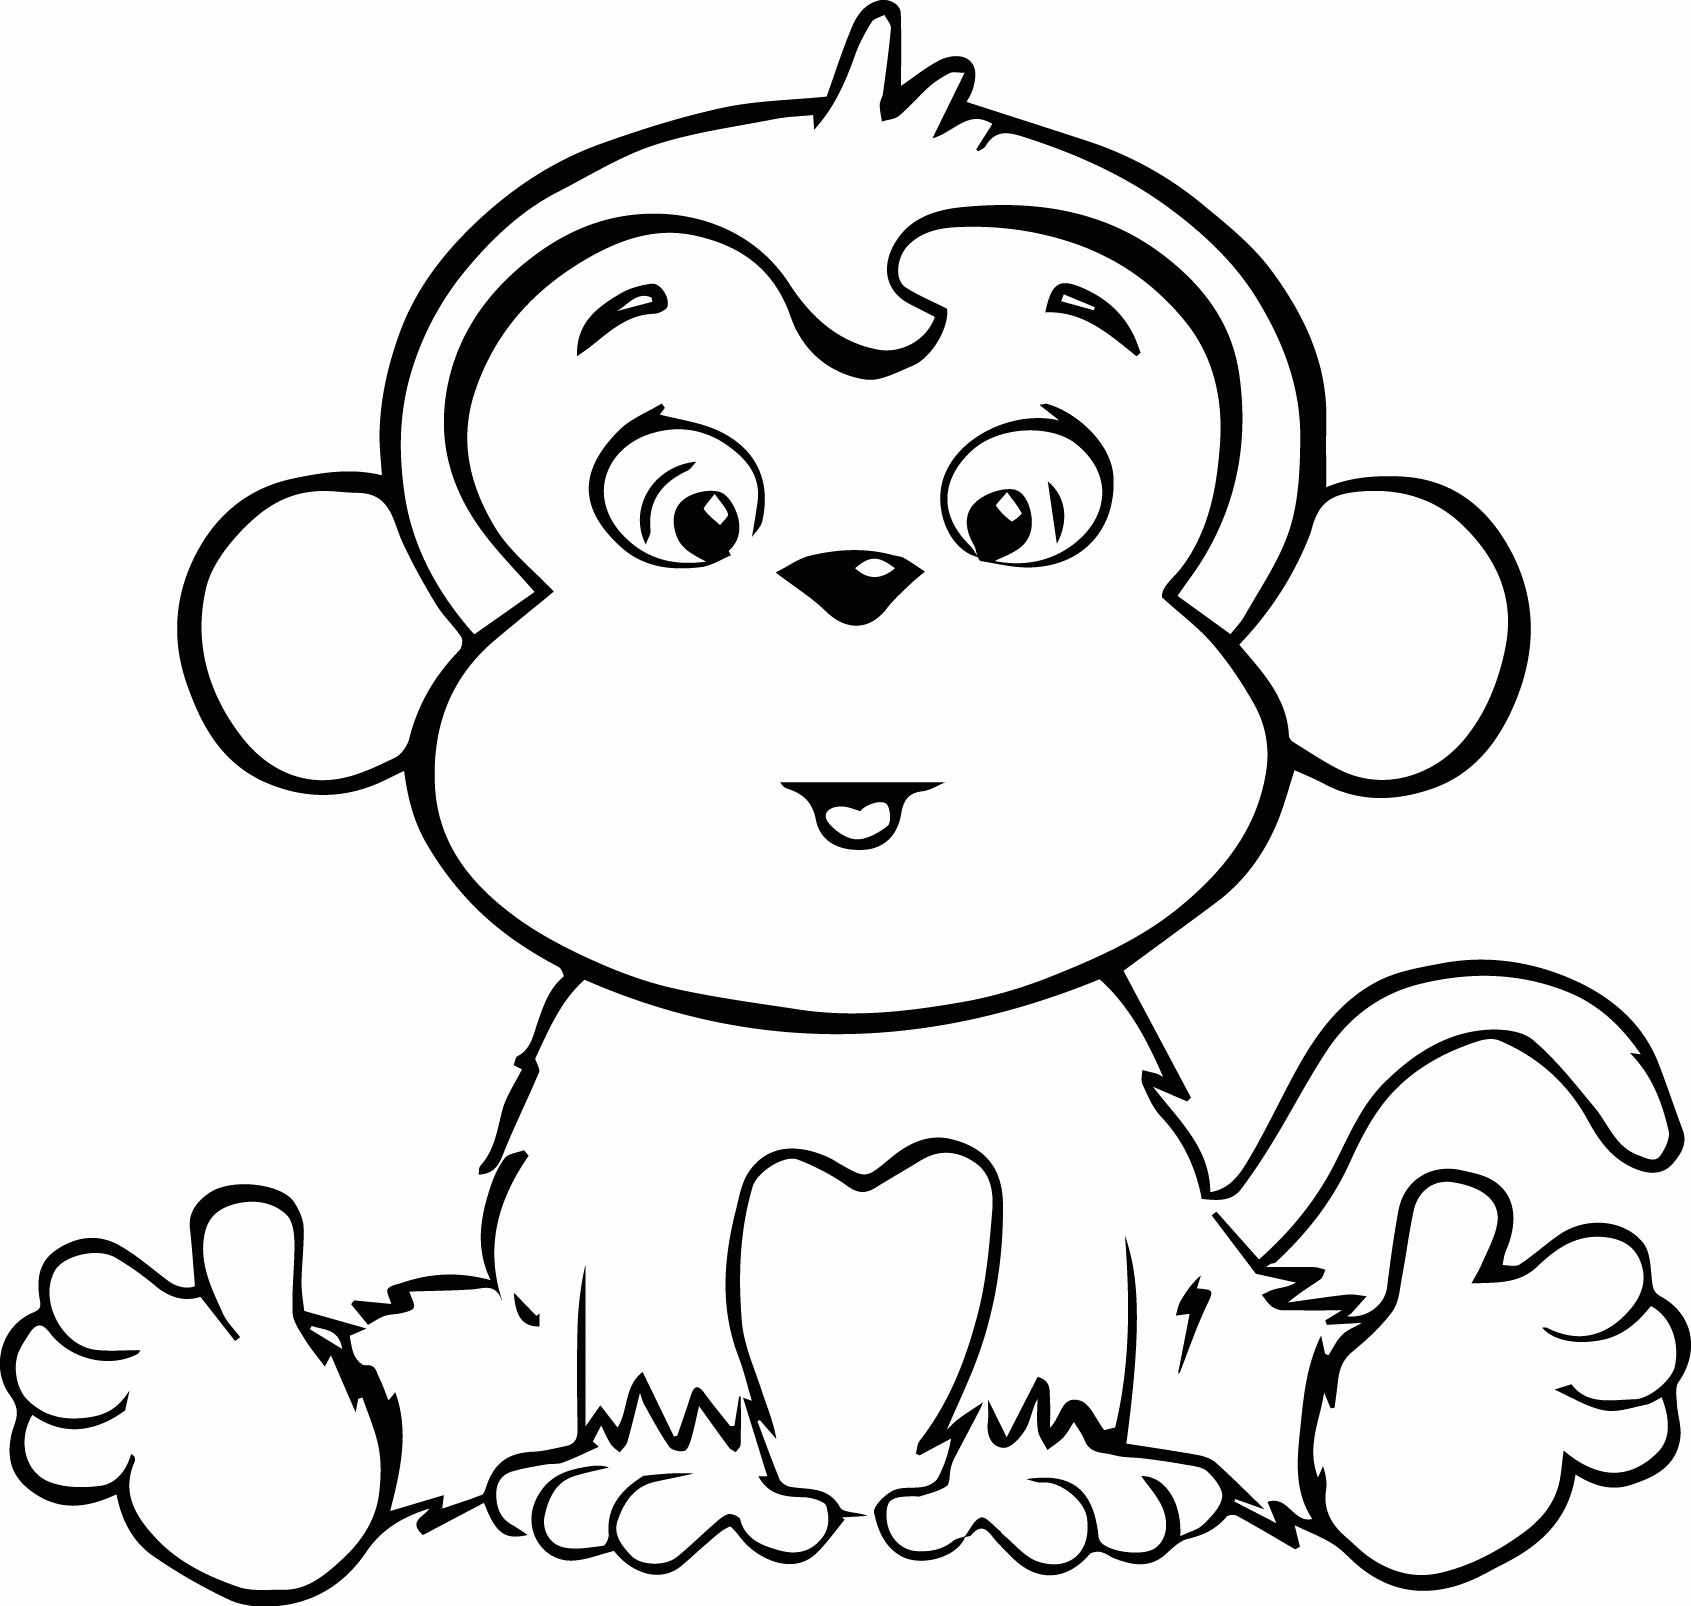 Cartoon Coloring Pages | Wecoloringpage